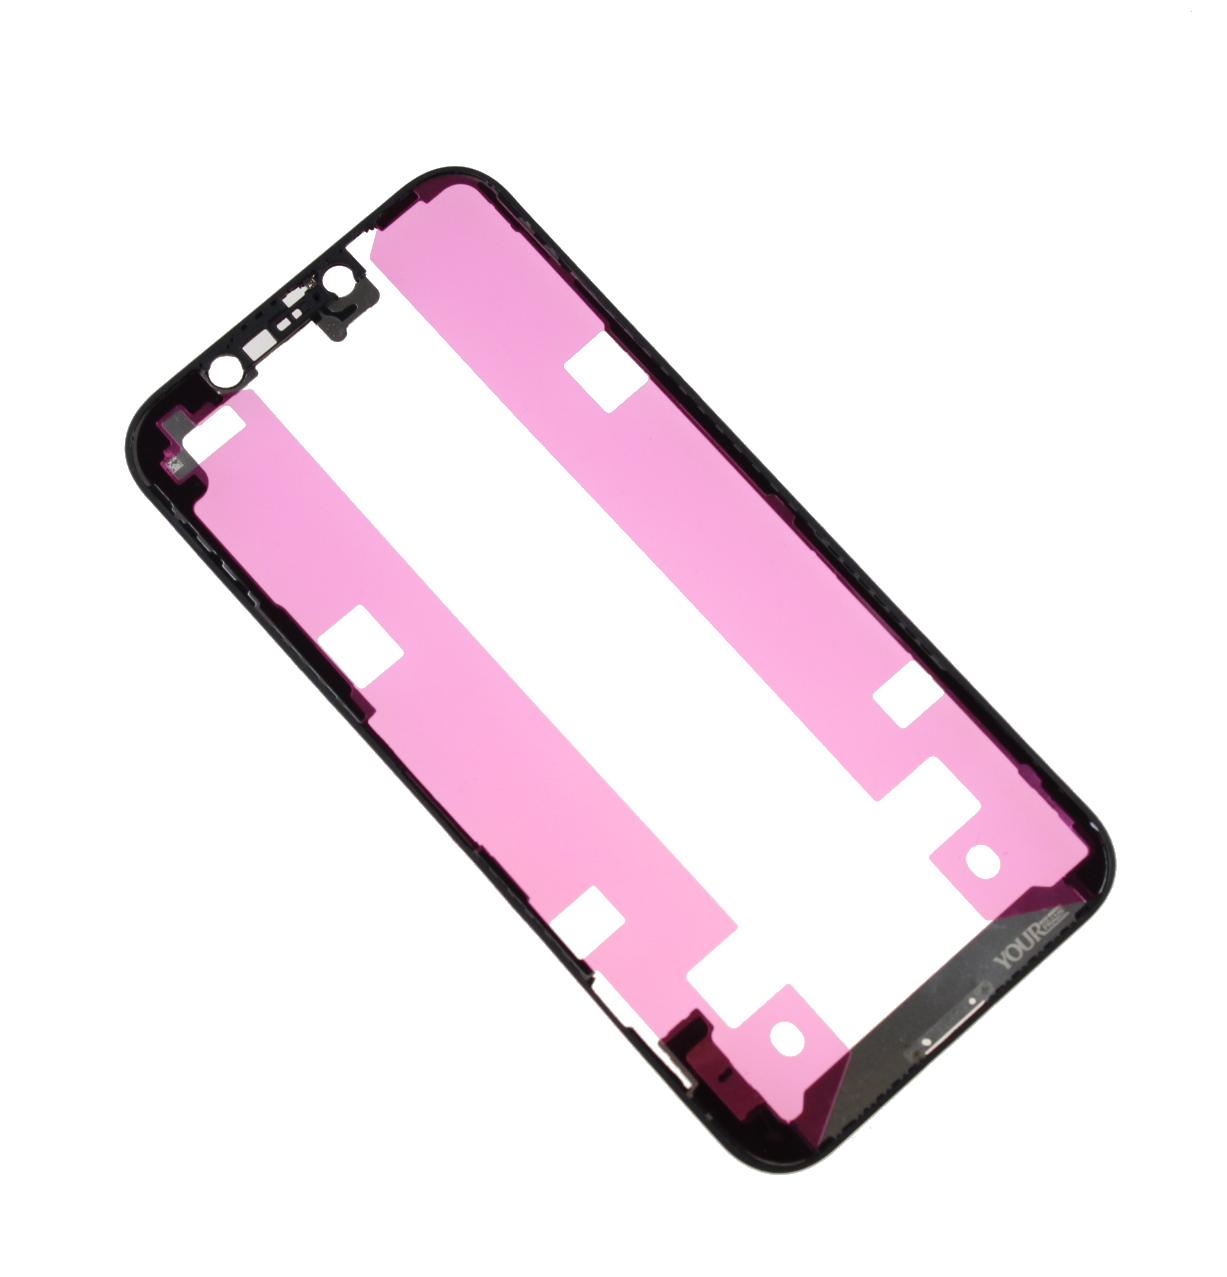 Musttby YOUR iPhone 12 / 12 Pro LCD frame + mounting tape